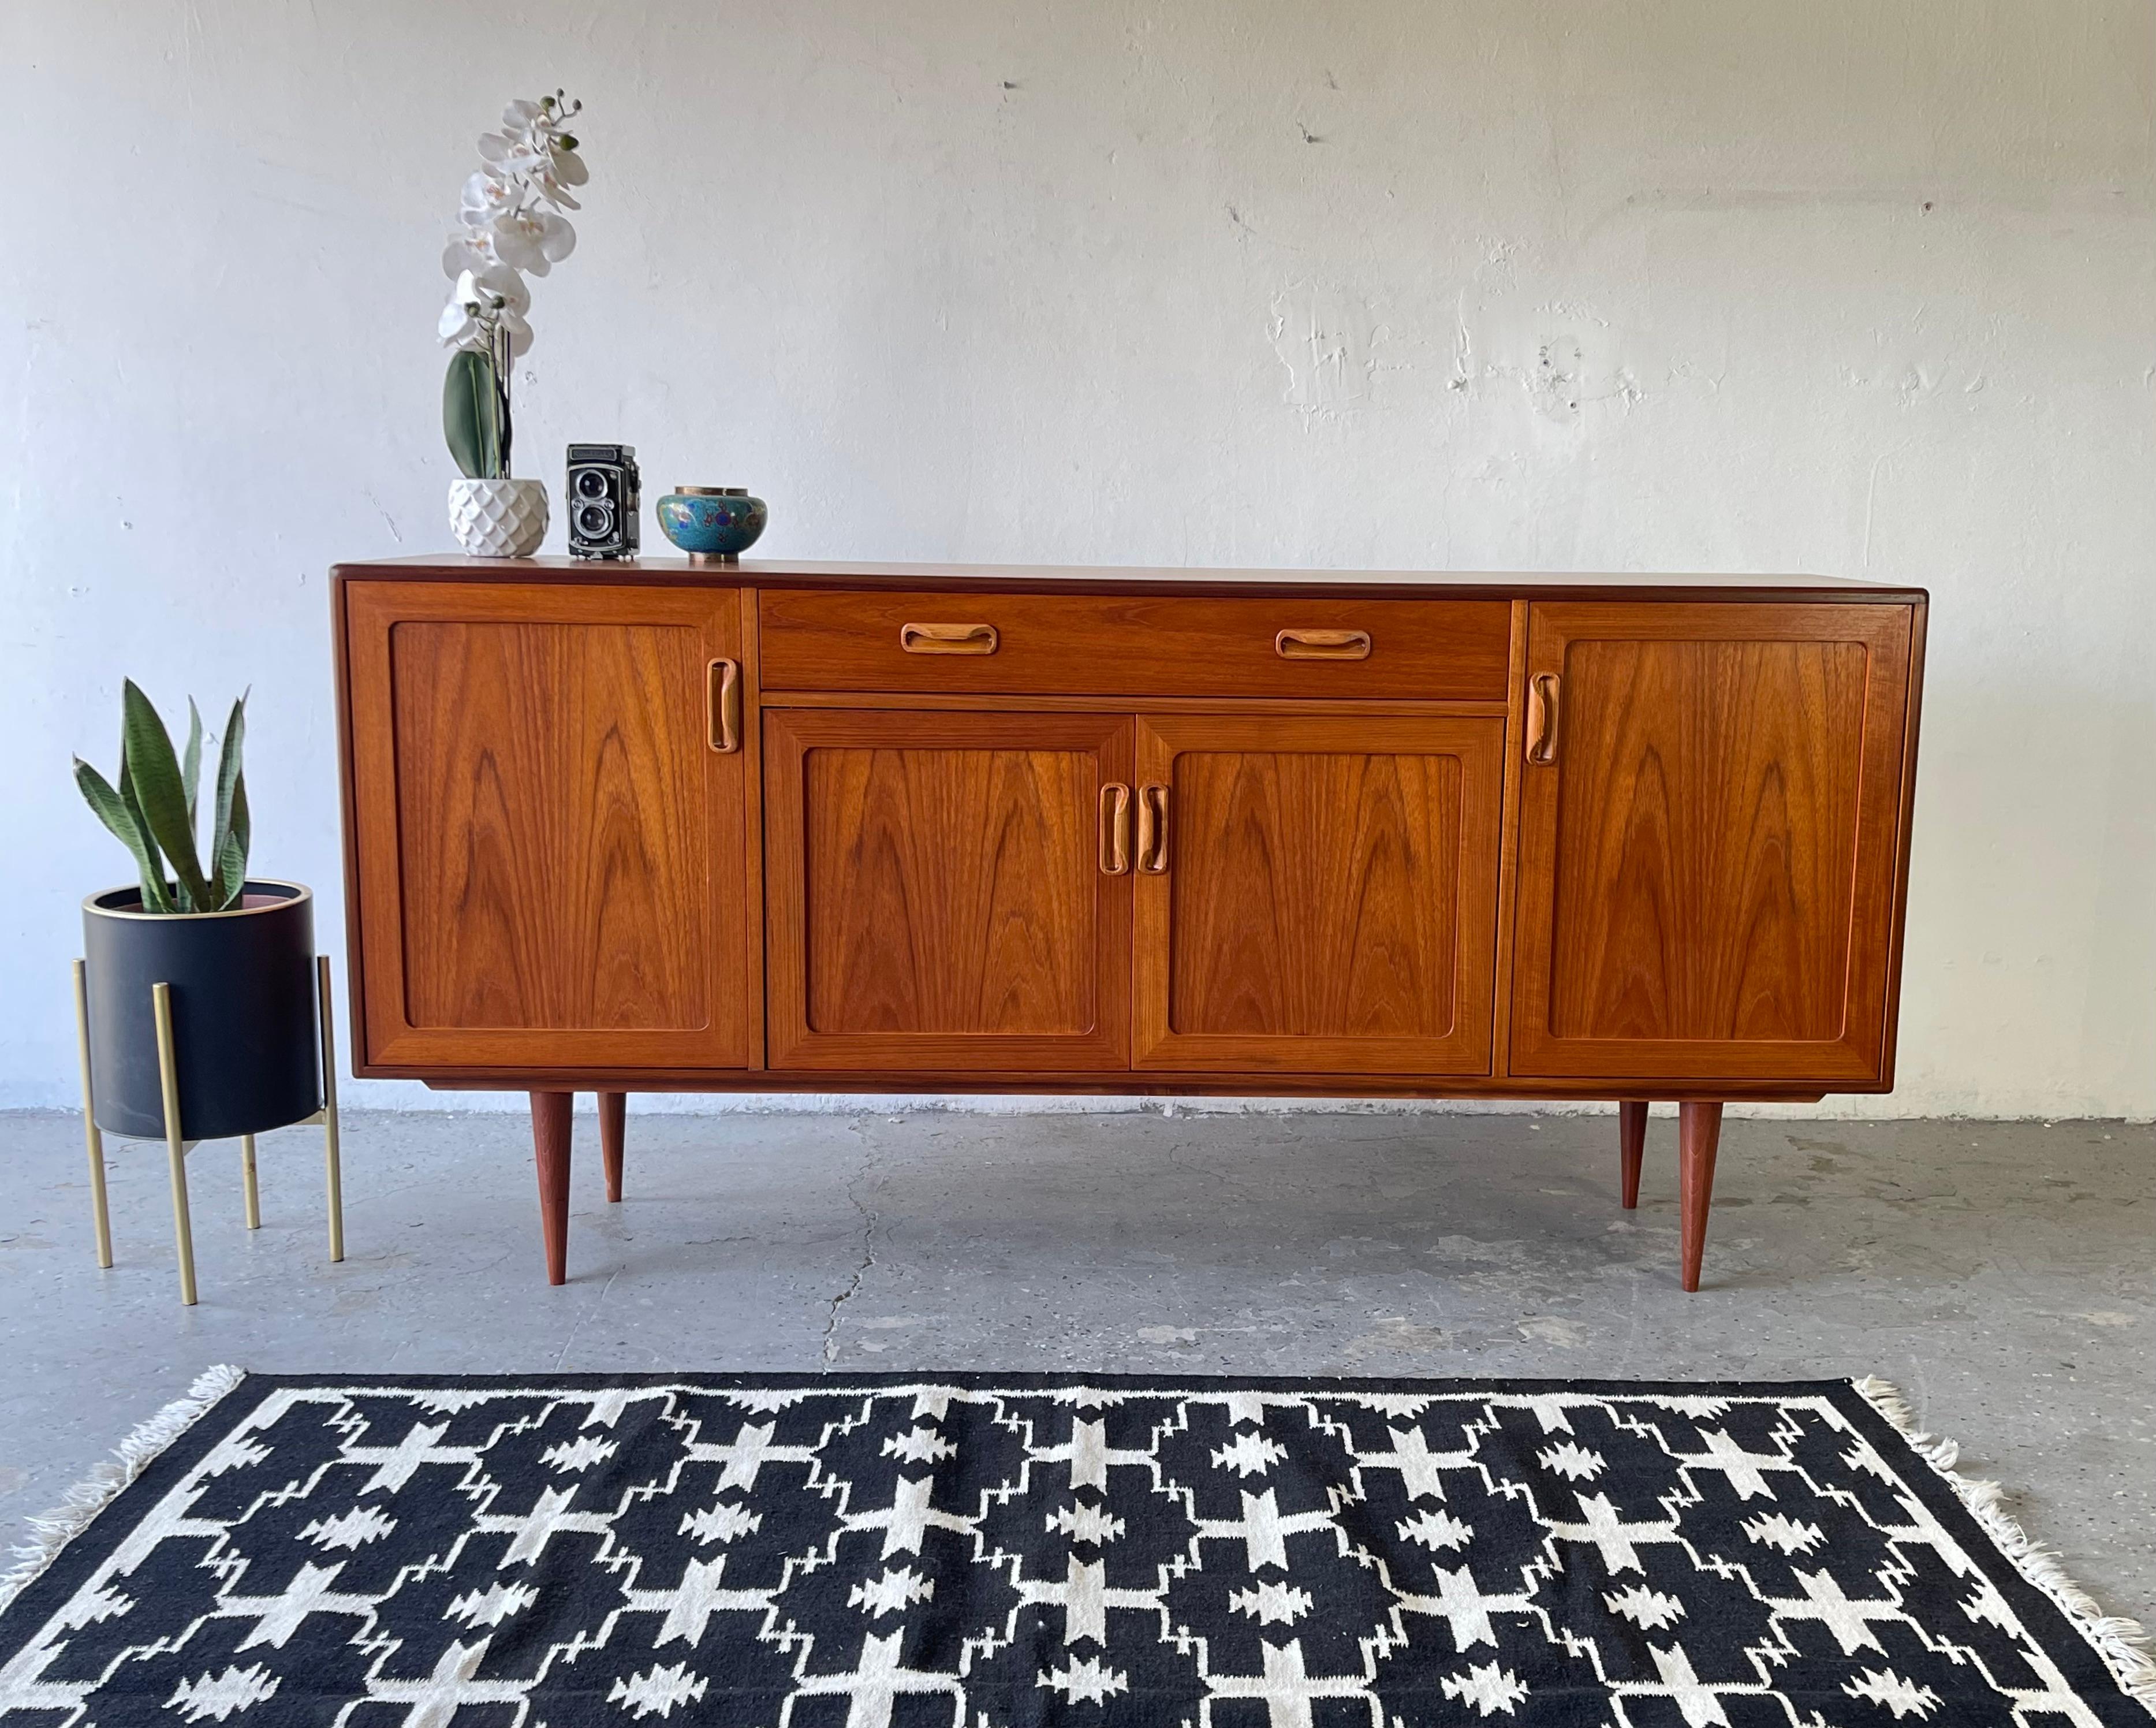 Mid Century Danish Modern Teak Credenza by VB Wilkins for G Plan
 British G-Plan · Midcentury Modern Teak Credenzas

This was the Rolls Royce of credenzas in the UK during the 1960s and its popularity still endures today

 

73” Wide 17.5” Deep 35”